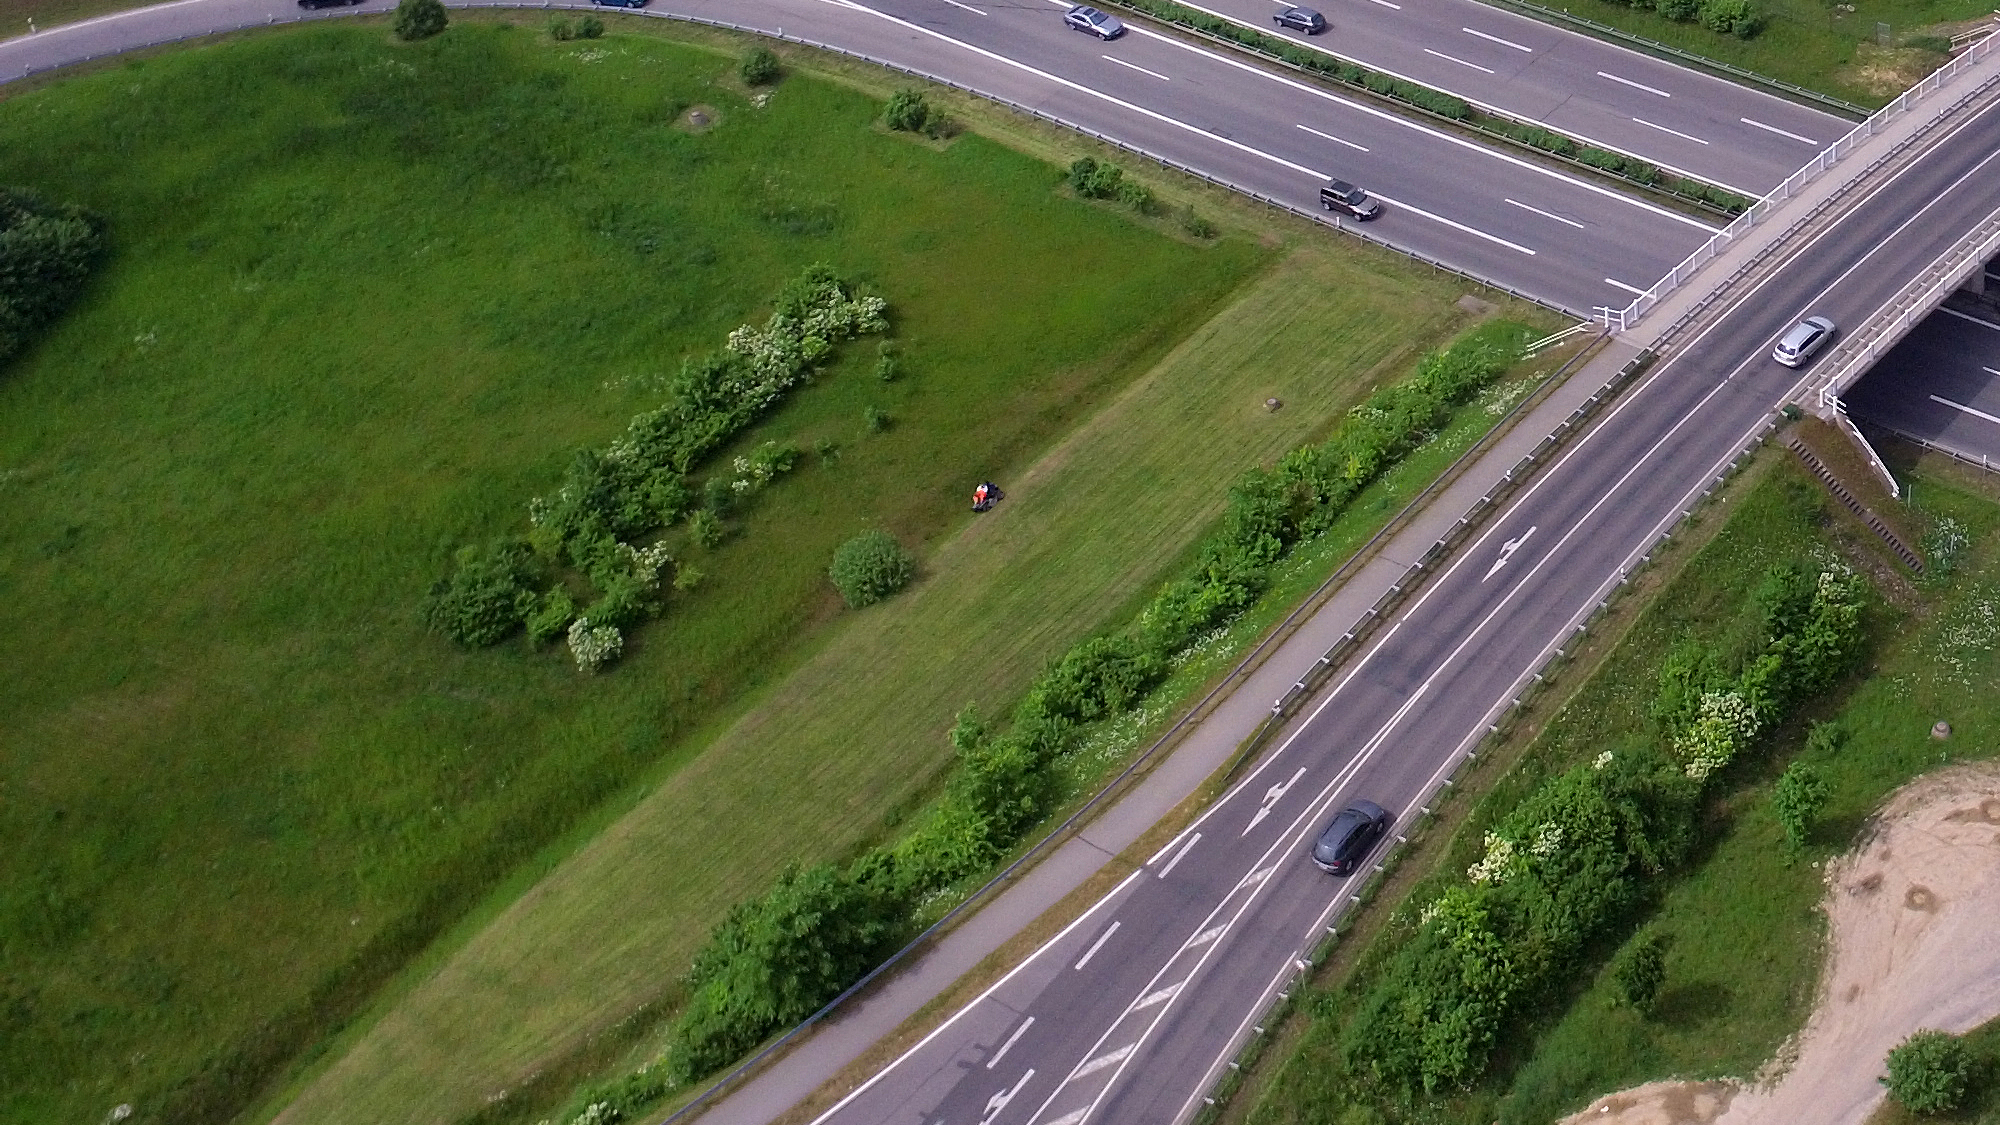 Aerial view of a highway crossing in Germany surrounded by green fields